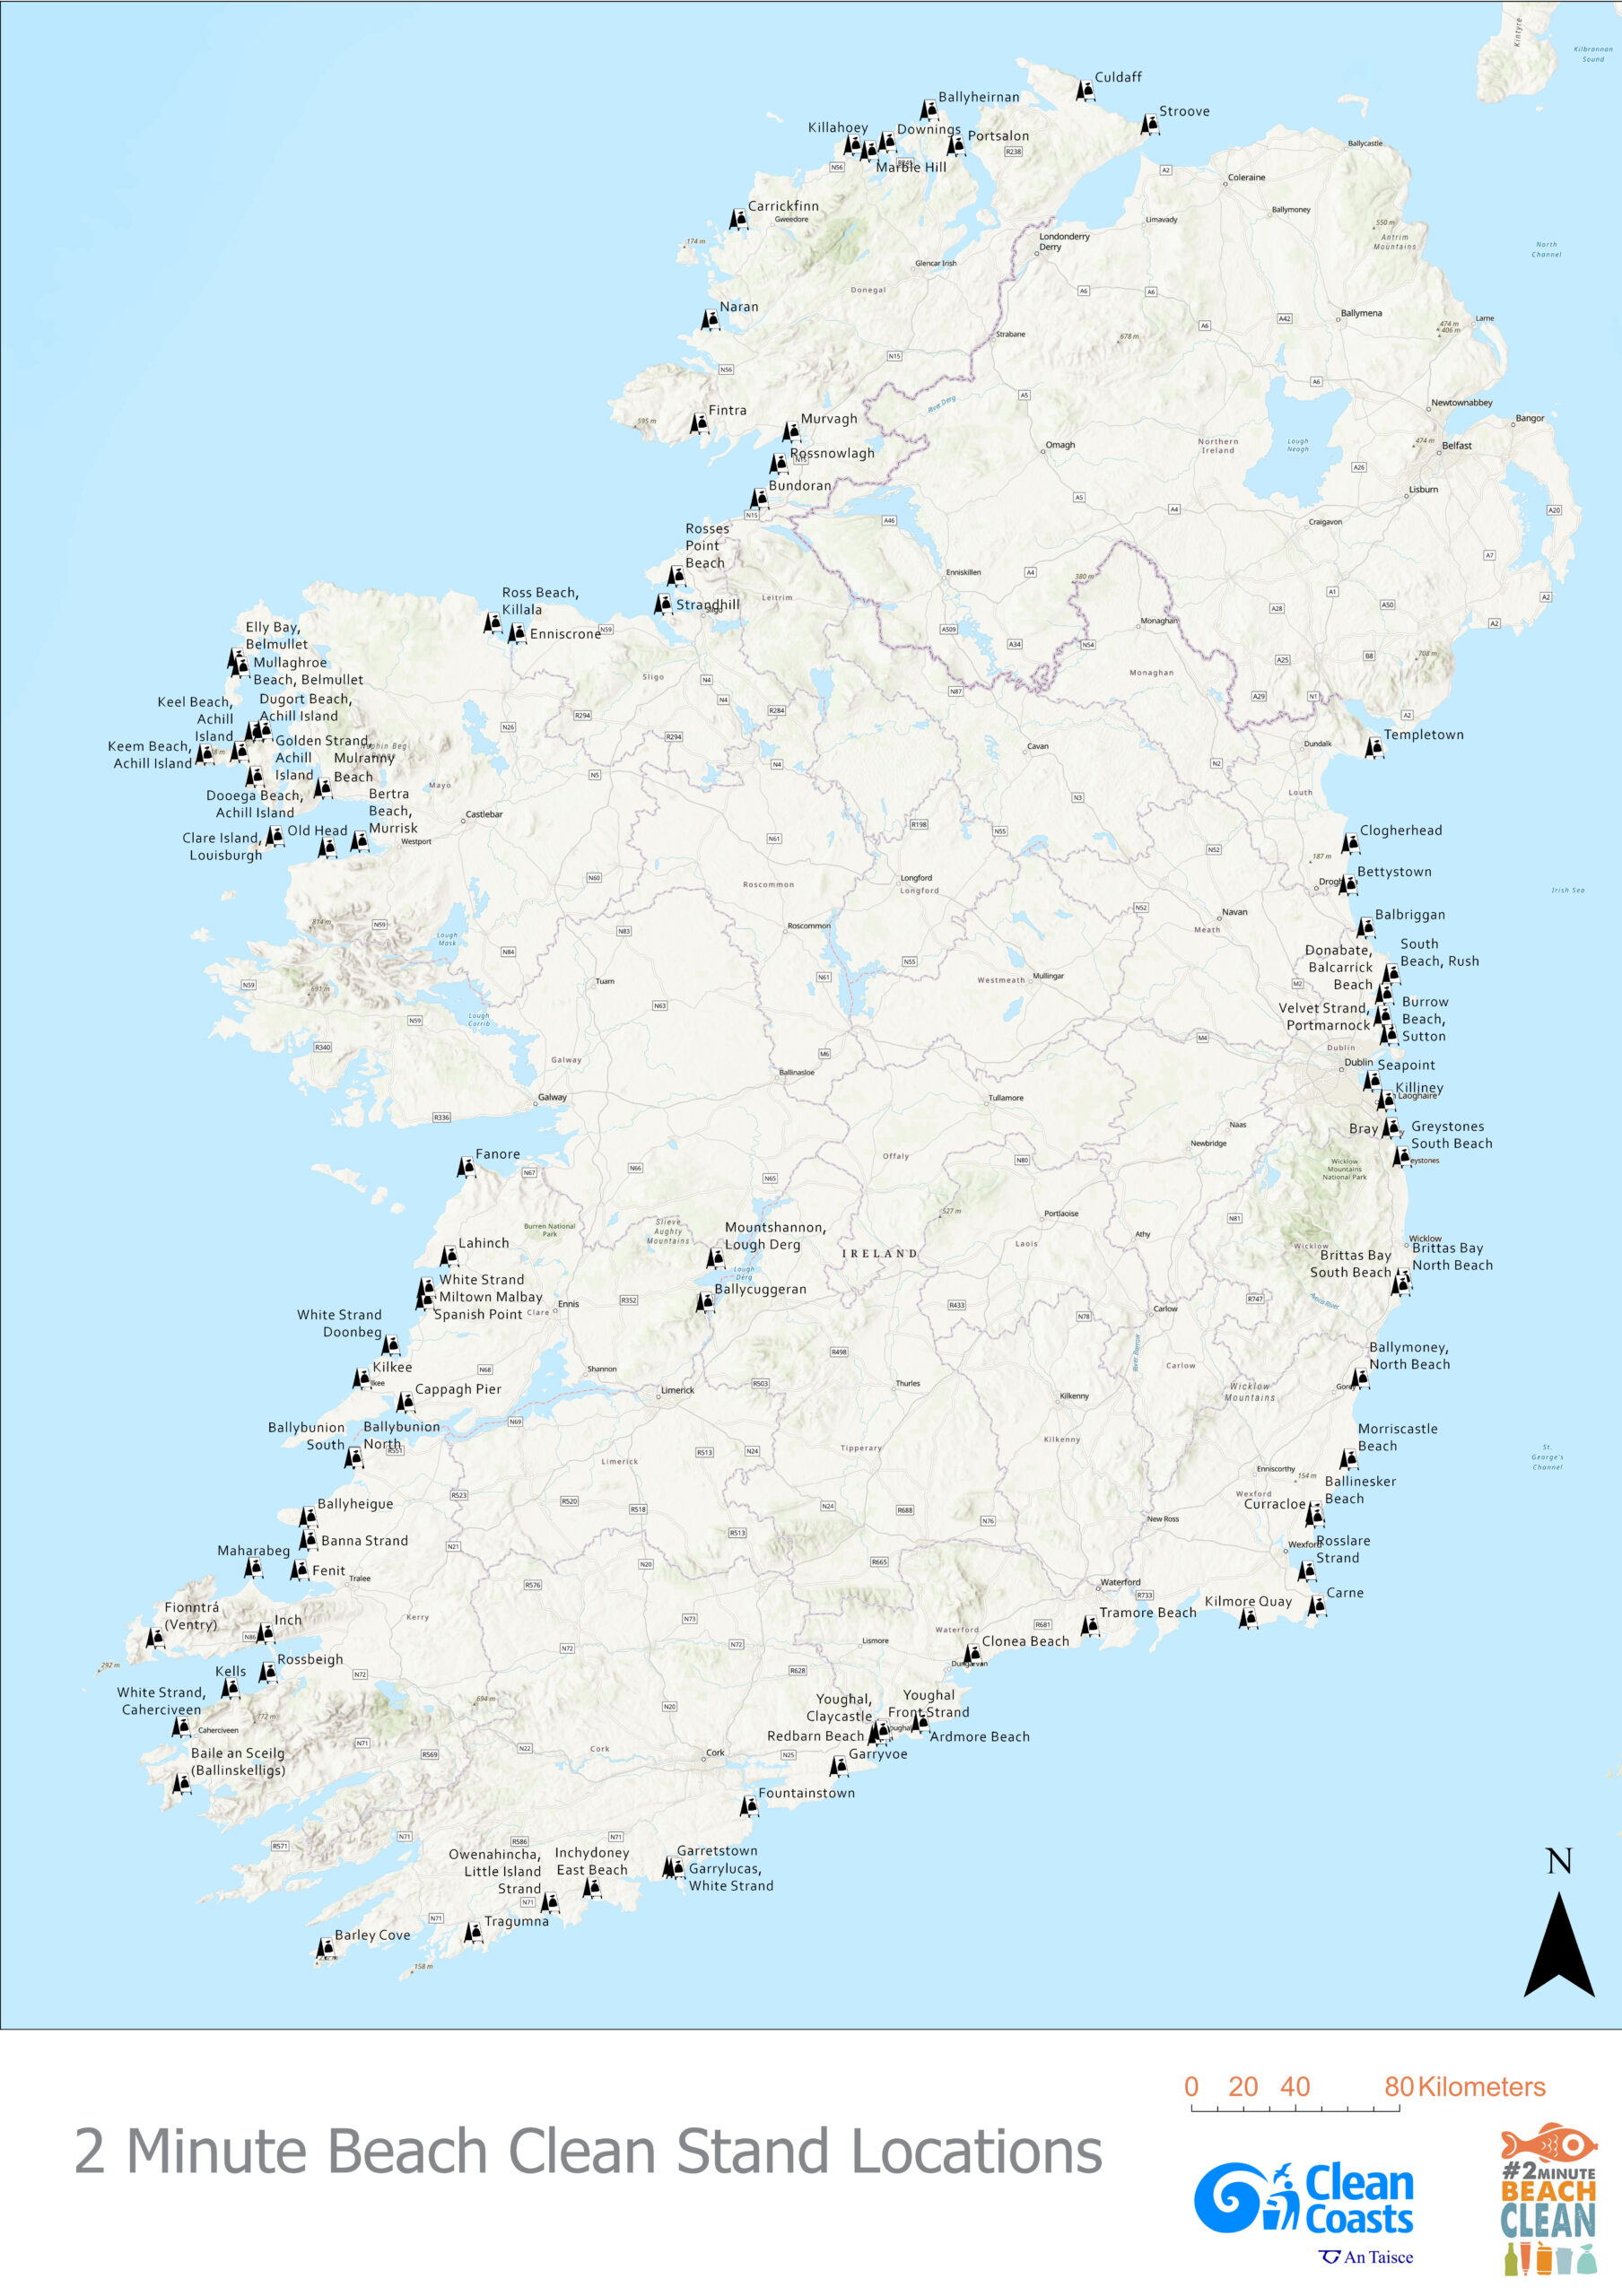 A map of all the #2MinuteBeachClean stations around Ireland